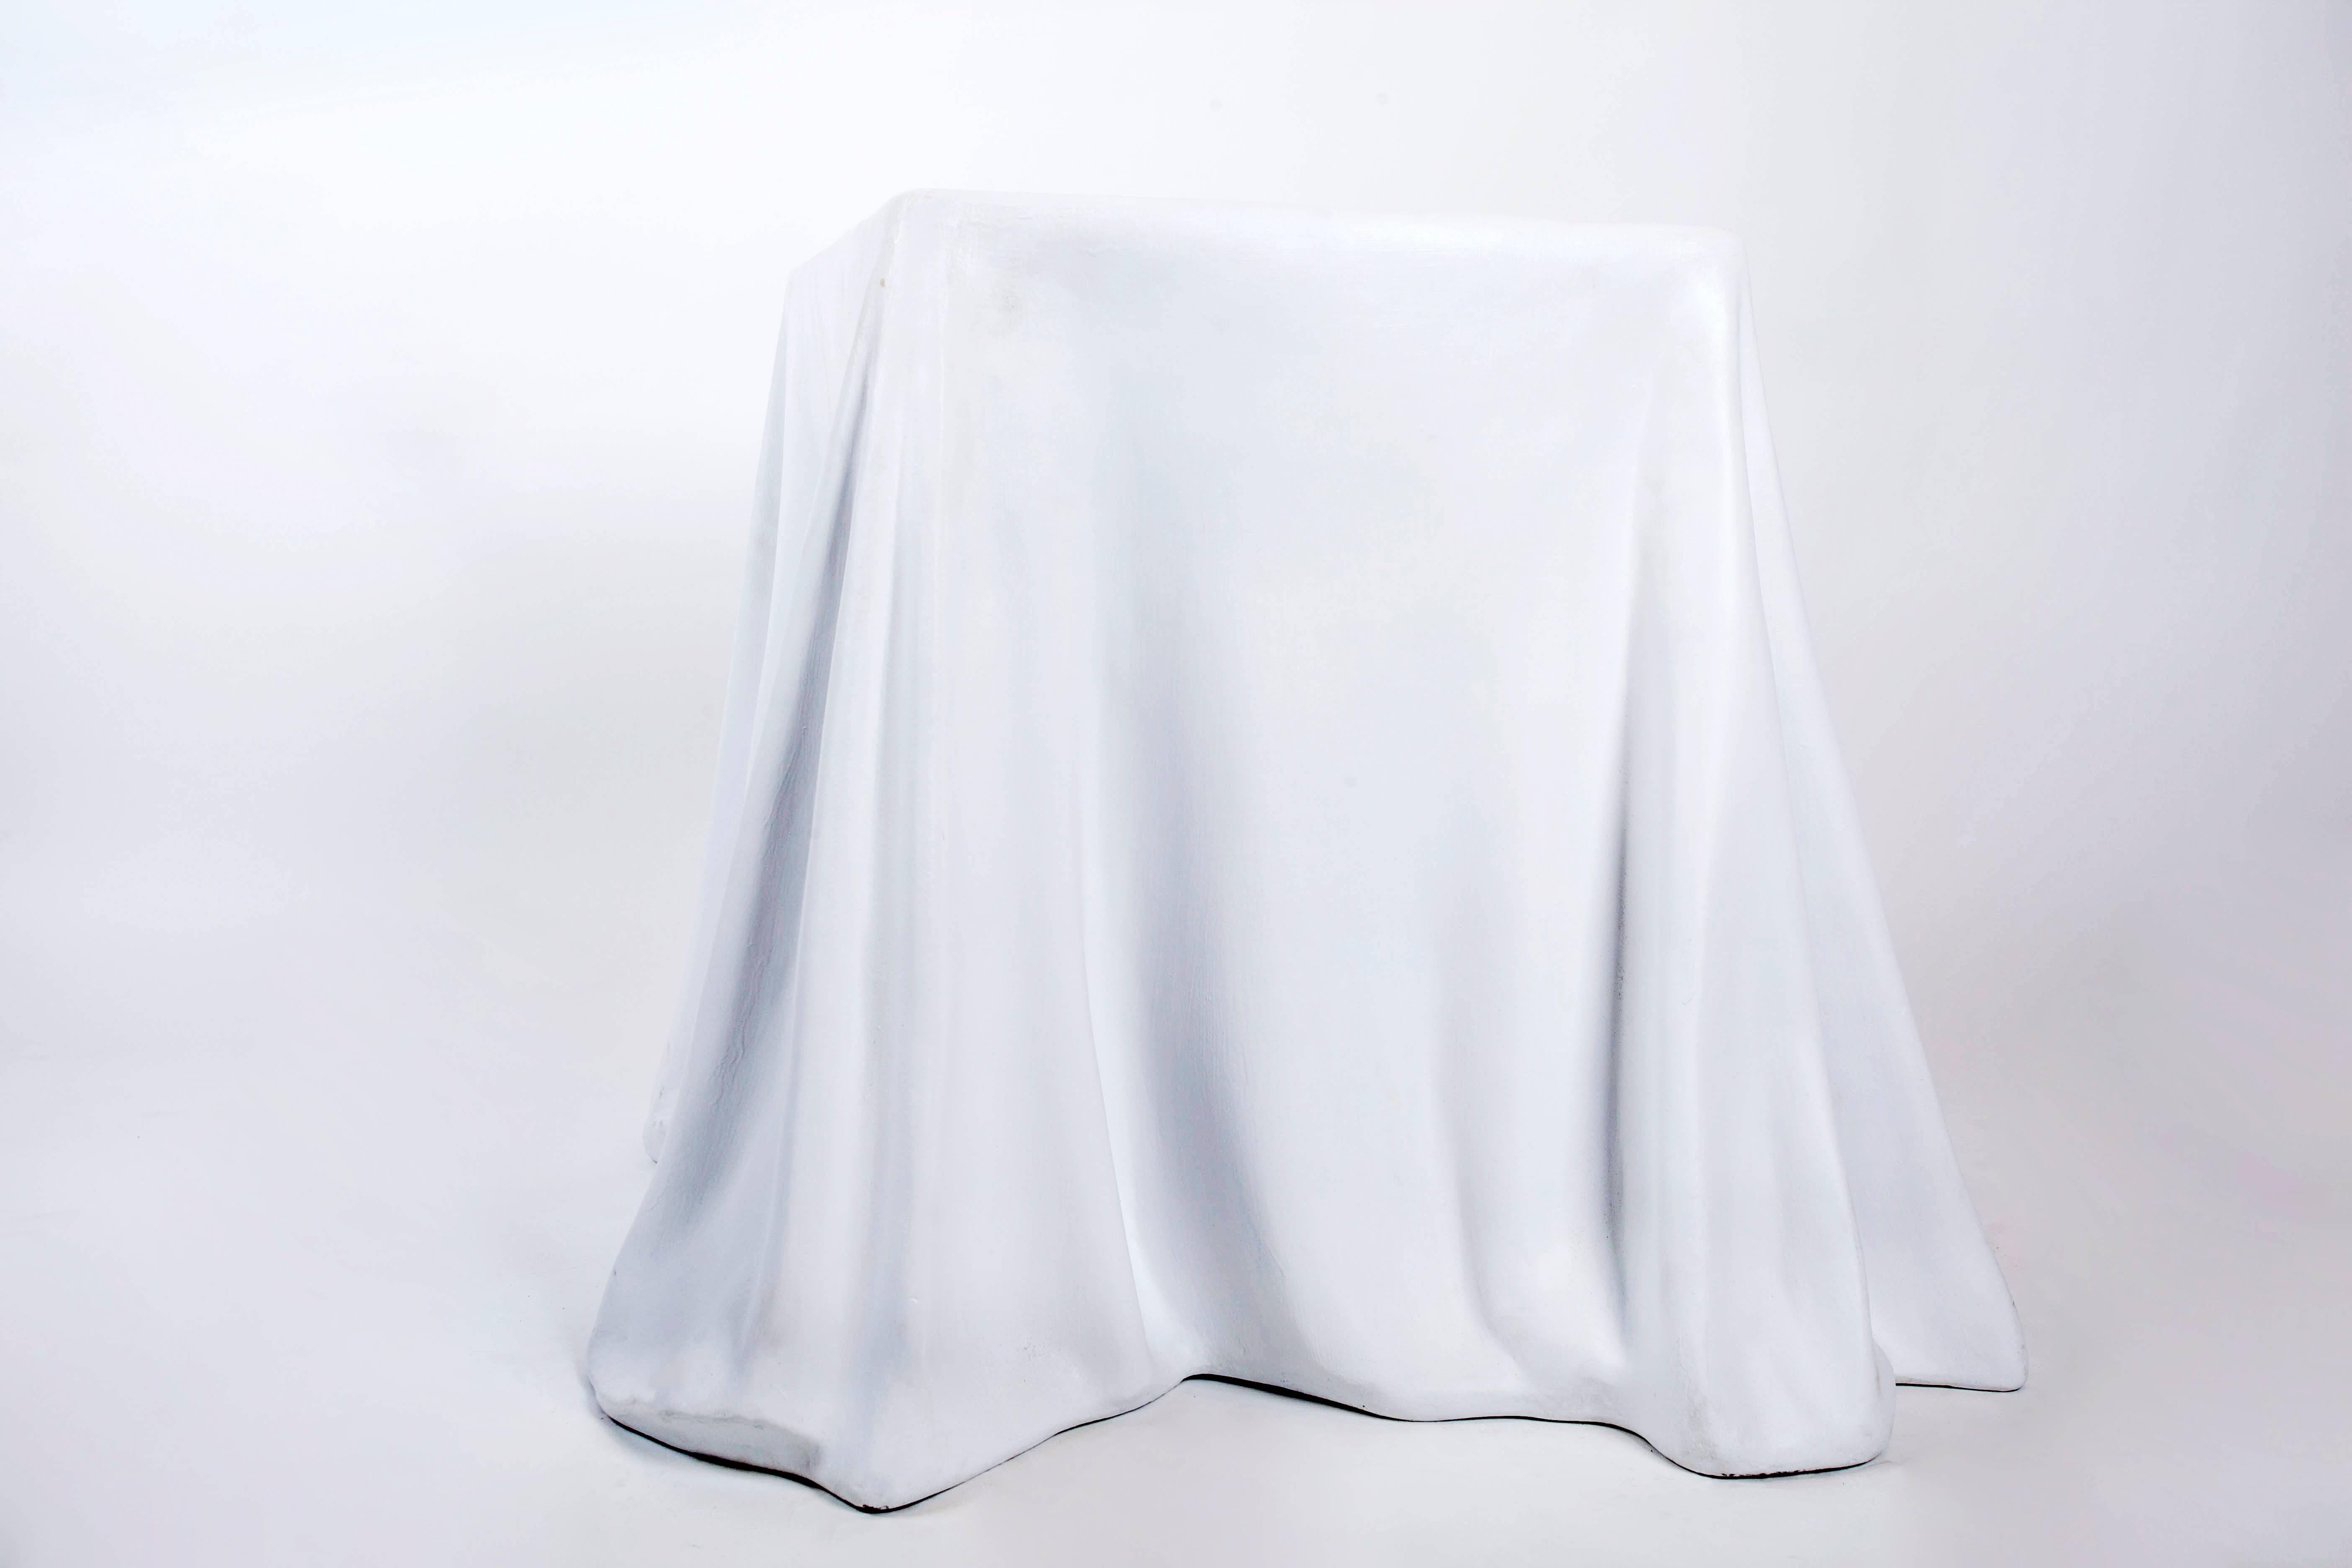 A realistically modeled draped plaster side table from the 1980s, designed in the manner of the Tovaglia table by Alberto Bazzani for Stendig. The moulded plaster has been fortified with fiberglass for durability and has been newly painted white.